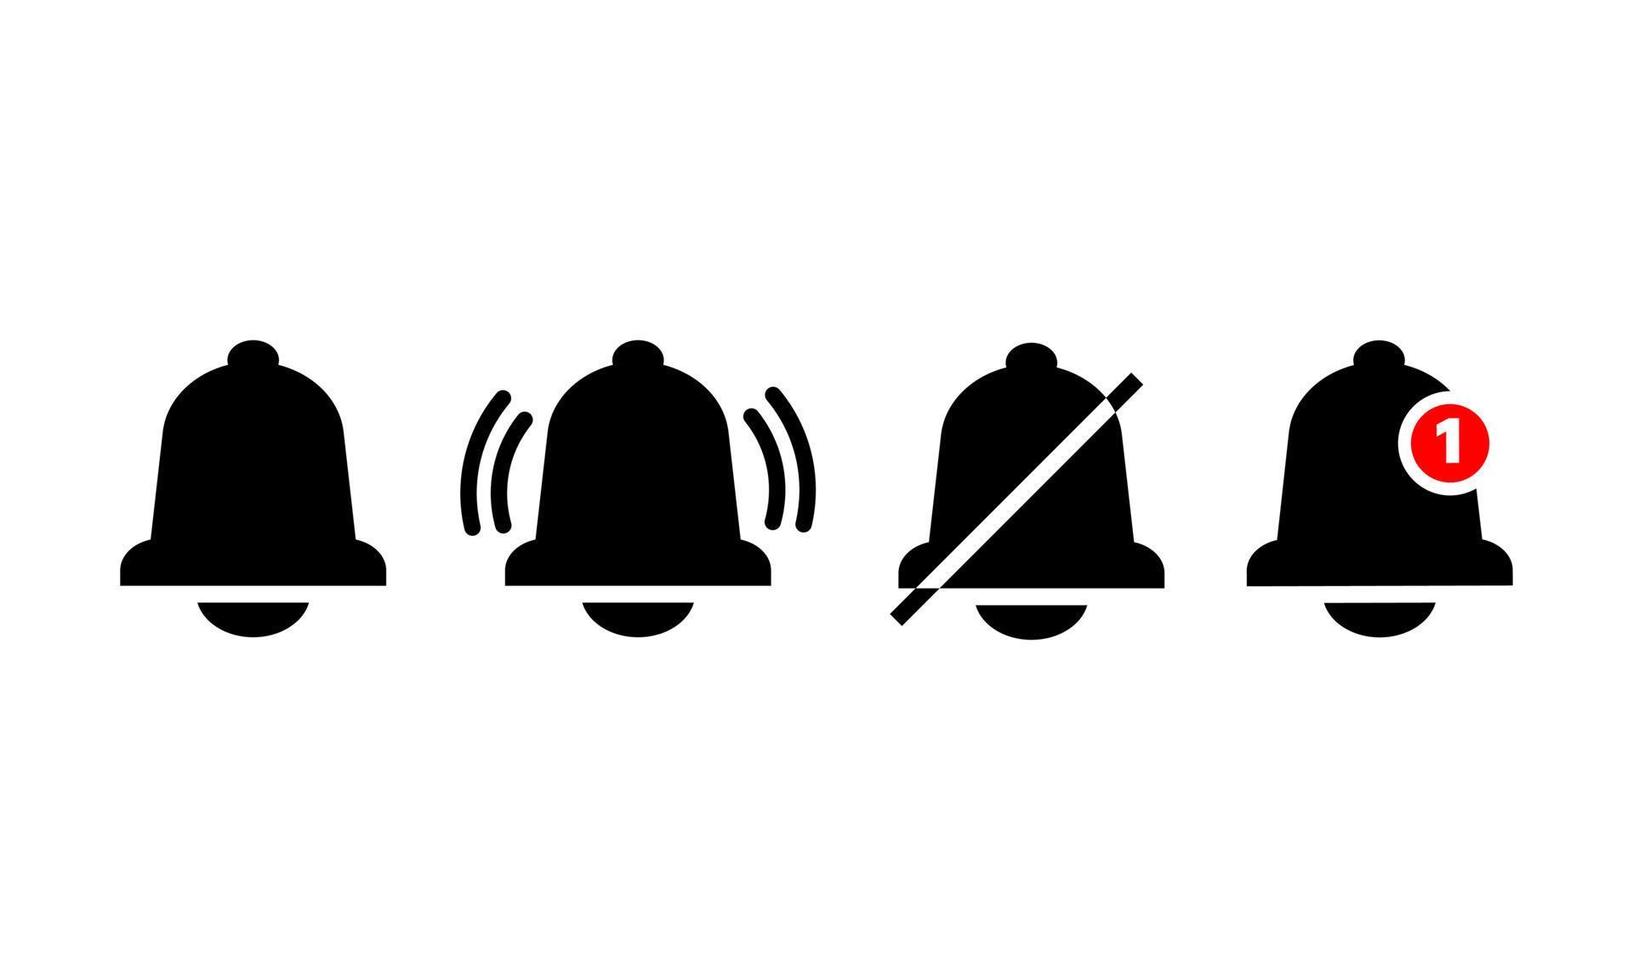 Set of bell icon notification icon. Vector illustration of bell icons with the different status. New message vector illustration